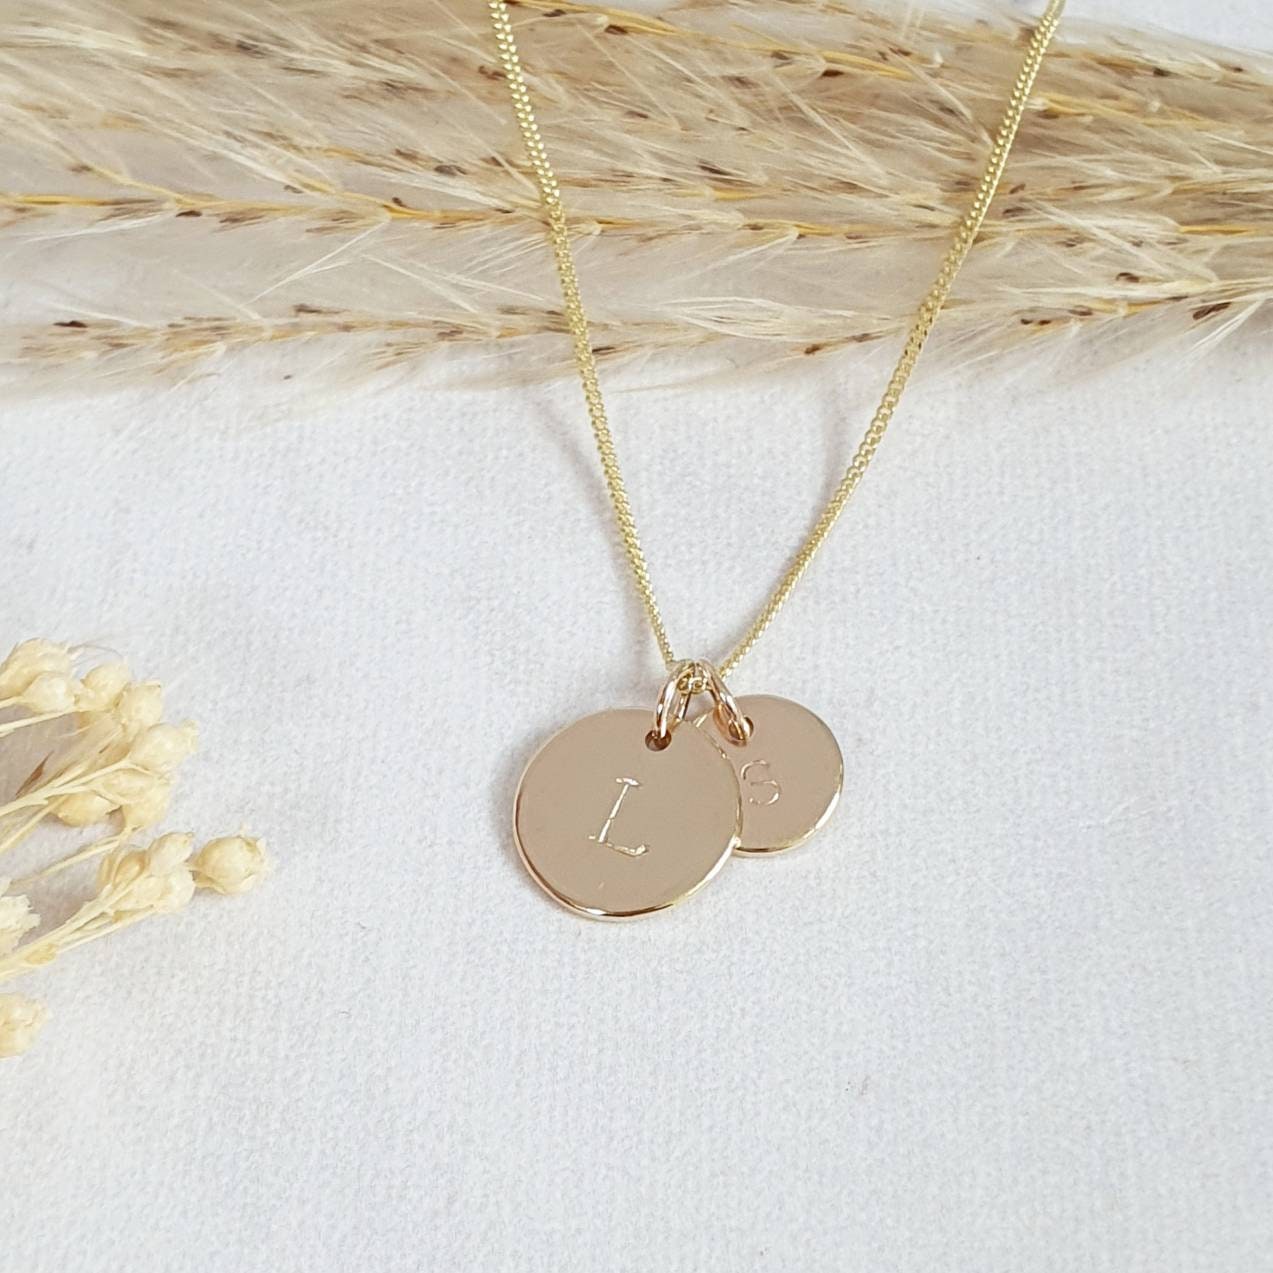 Gold Family Initials Necklace